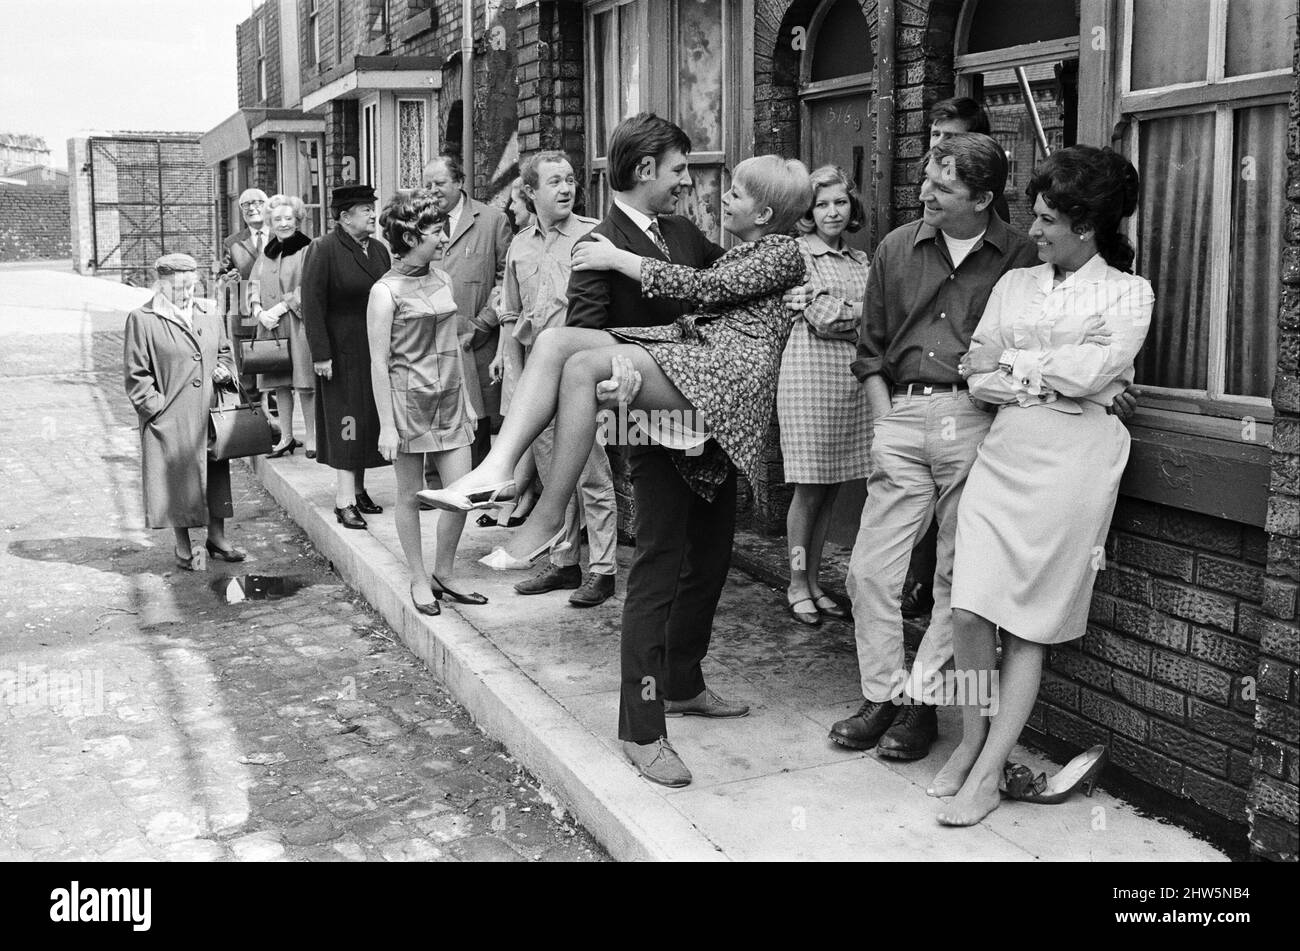 A new street setting for 'Coronation Street'. Granada TV have built an outdoor set for shooting some of the scenes. Pictured are cast members:  Cast member Dennis Tanner (Philip Lowrie) with his bride Jenny Sutton (Mitzi Rogers) after their wedding with Annie Walker (Doris Speed), Ena Sharples (Violet Carson), Emily Nugent (Eileen Derbyshire), Valerie Barlow (Anne Reid), Ken Barlow (William Roache) Len Fairclough (Peter Adamson). and Elsie Tanner (Pat Phoenix). 18th May 1968. Stock Photo